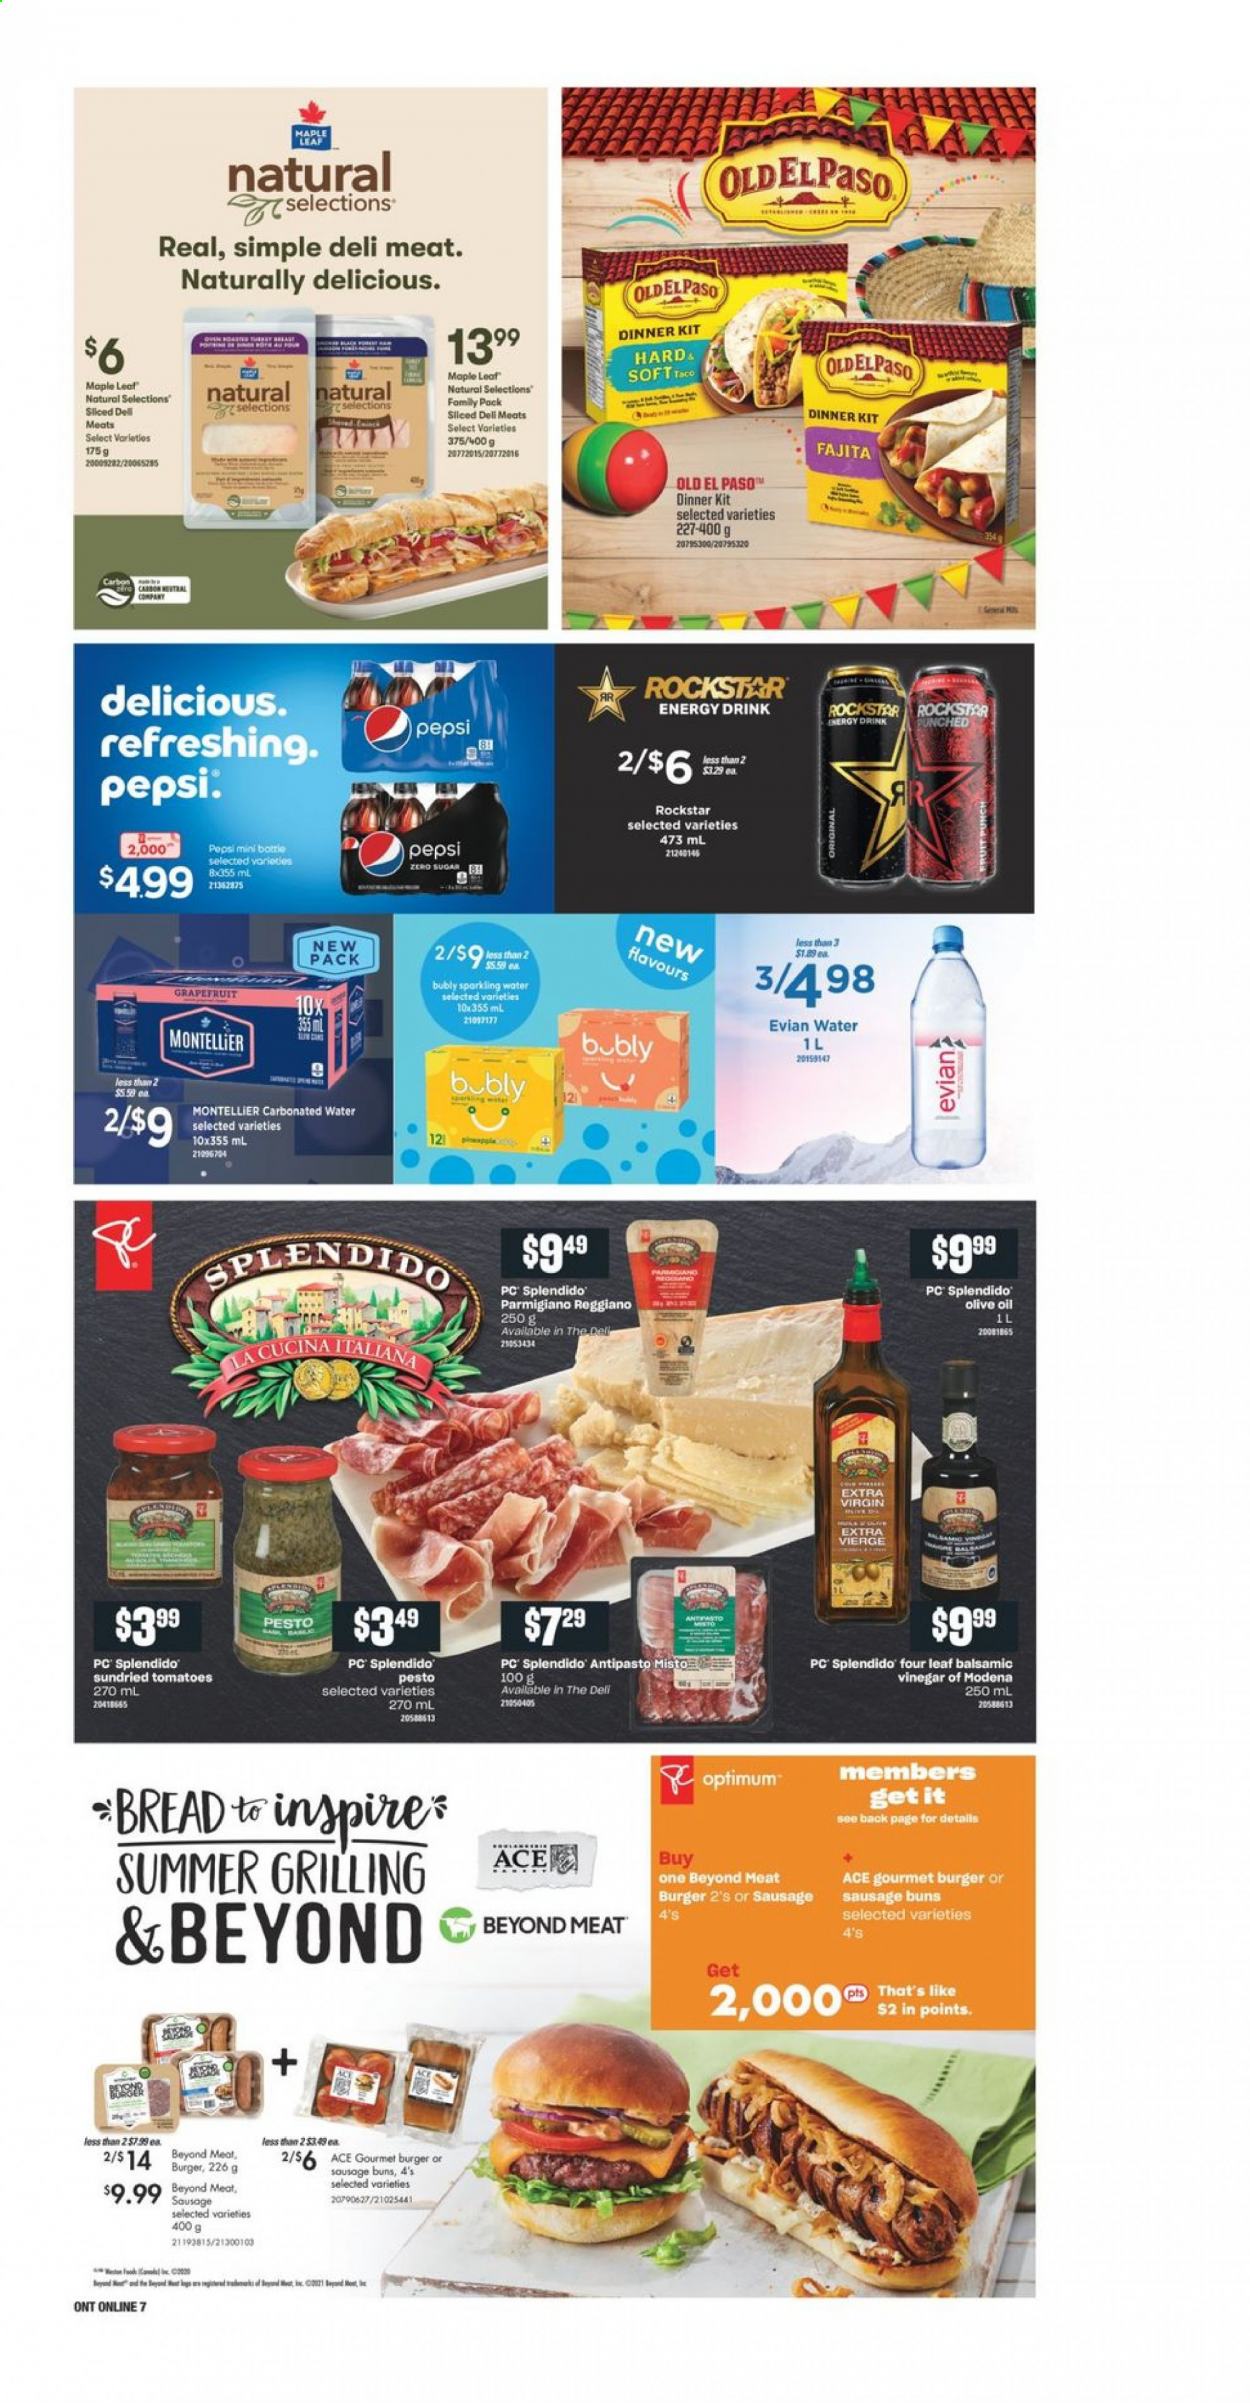 thumbnail - Independent Flyer - April 29, 2021 - May 05, 2021 - Sales products - bread, buns, Ace, tomatoes, grapefruits, hamburger, dinner kit, fajita, sausage, Parmigiano Reggiano, dried tomatoes, balsamic vinegar, extra virgin olive oil, vinegar, olive oil, oil, Pepsi, energy drink, Rockstar, sparkling water, Evian, Optimum. Page 11.